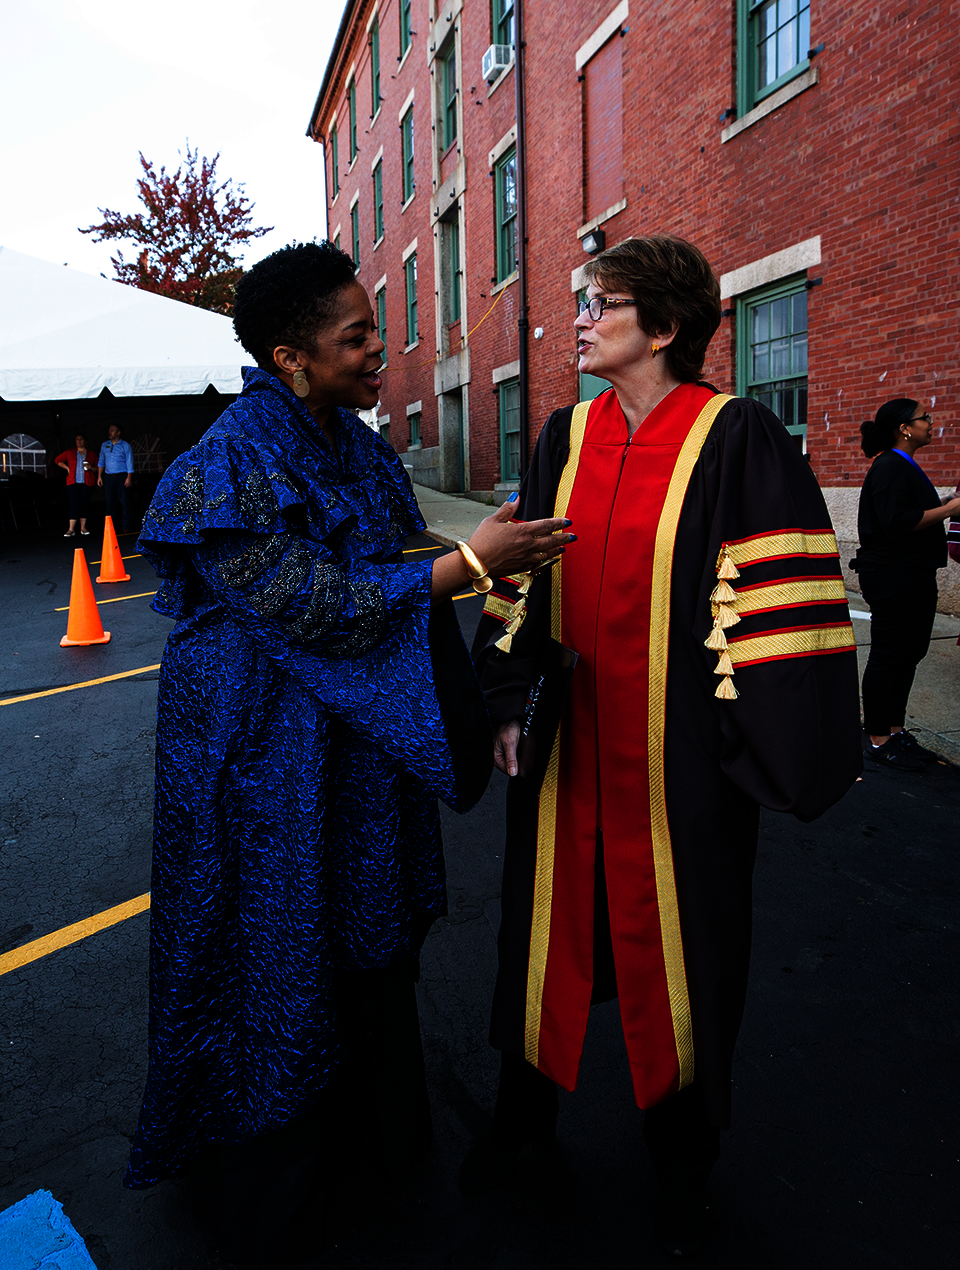 A Black woman in blue ceremonial robes engages in cheerful conversation with a white woman in doctoral robes with red and golds stripes.